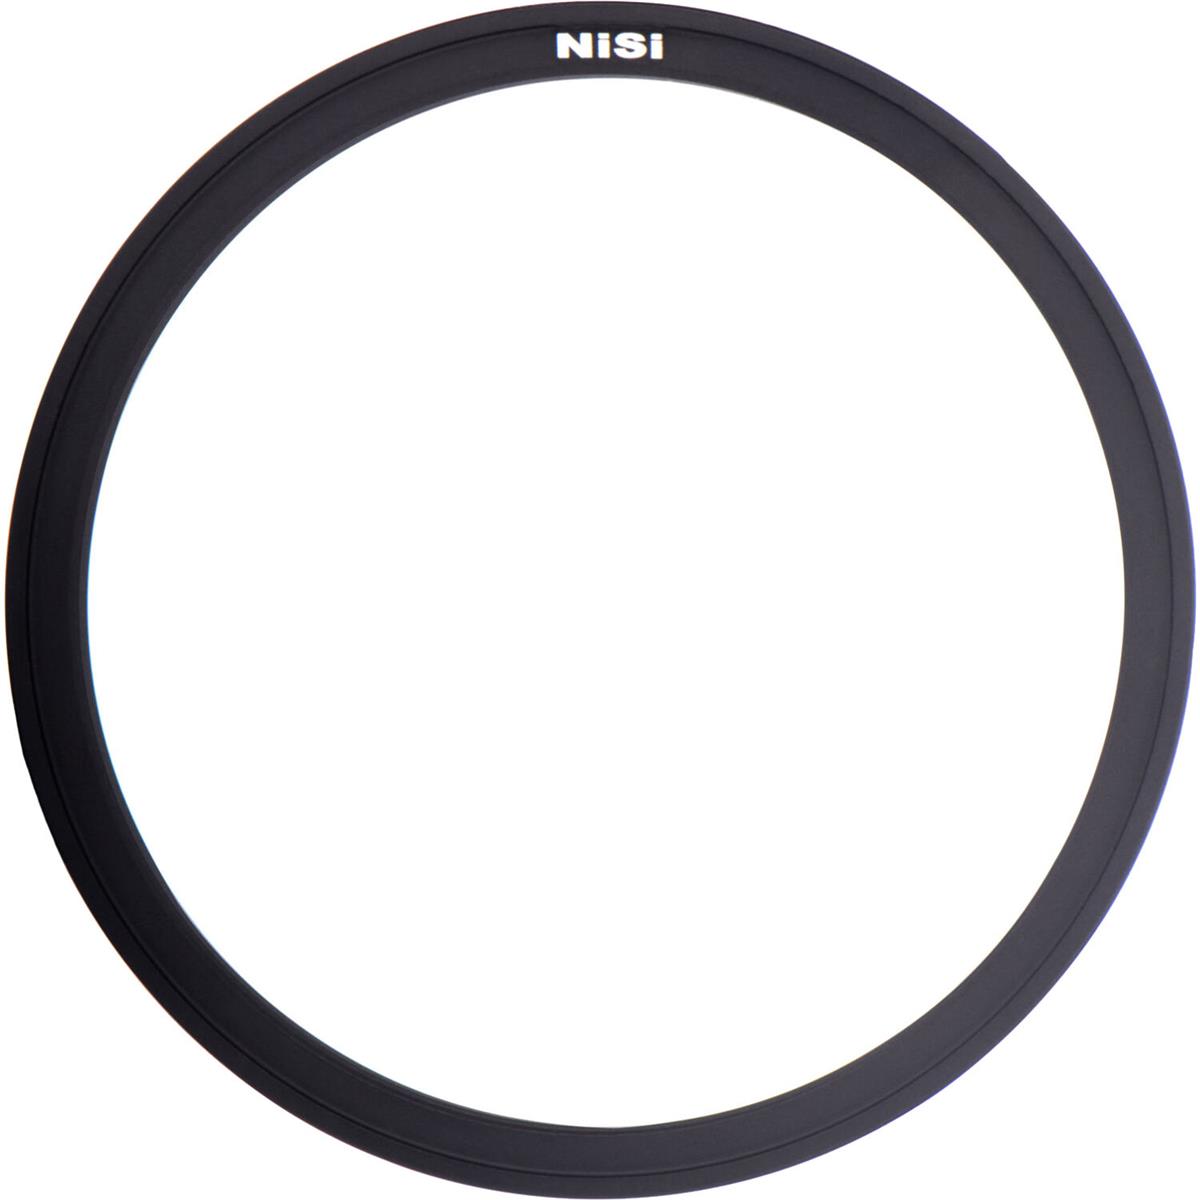 Image of NiSi 82-77mm Step Down Ring Adapter for NiSi Close Up Lens